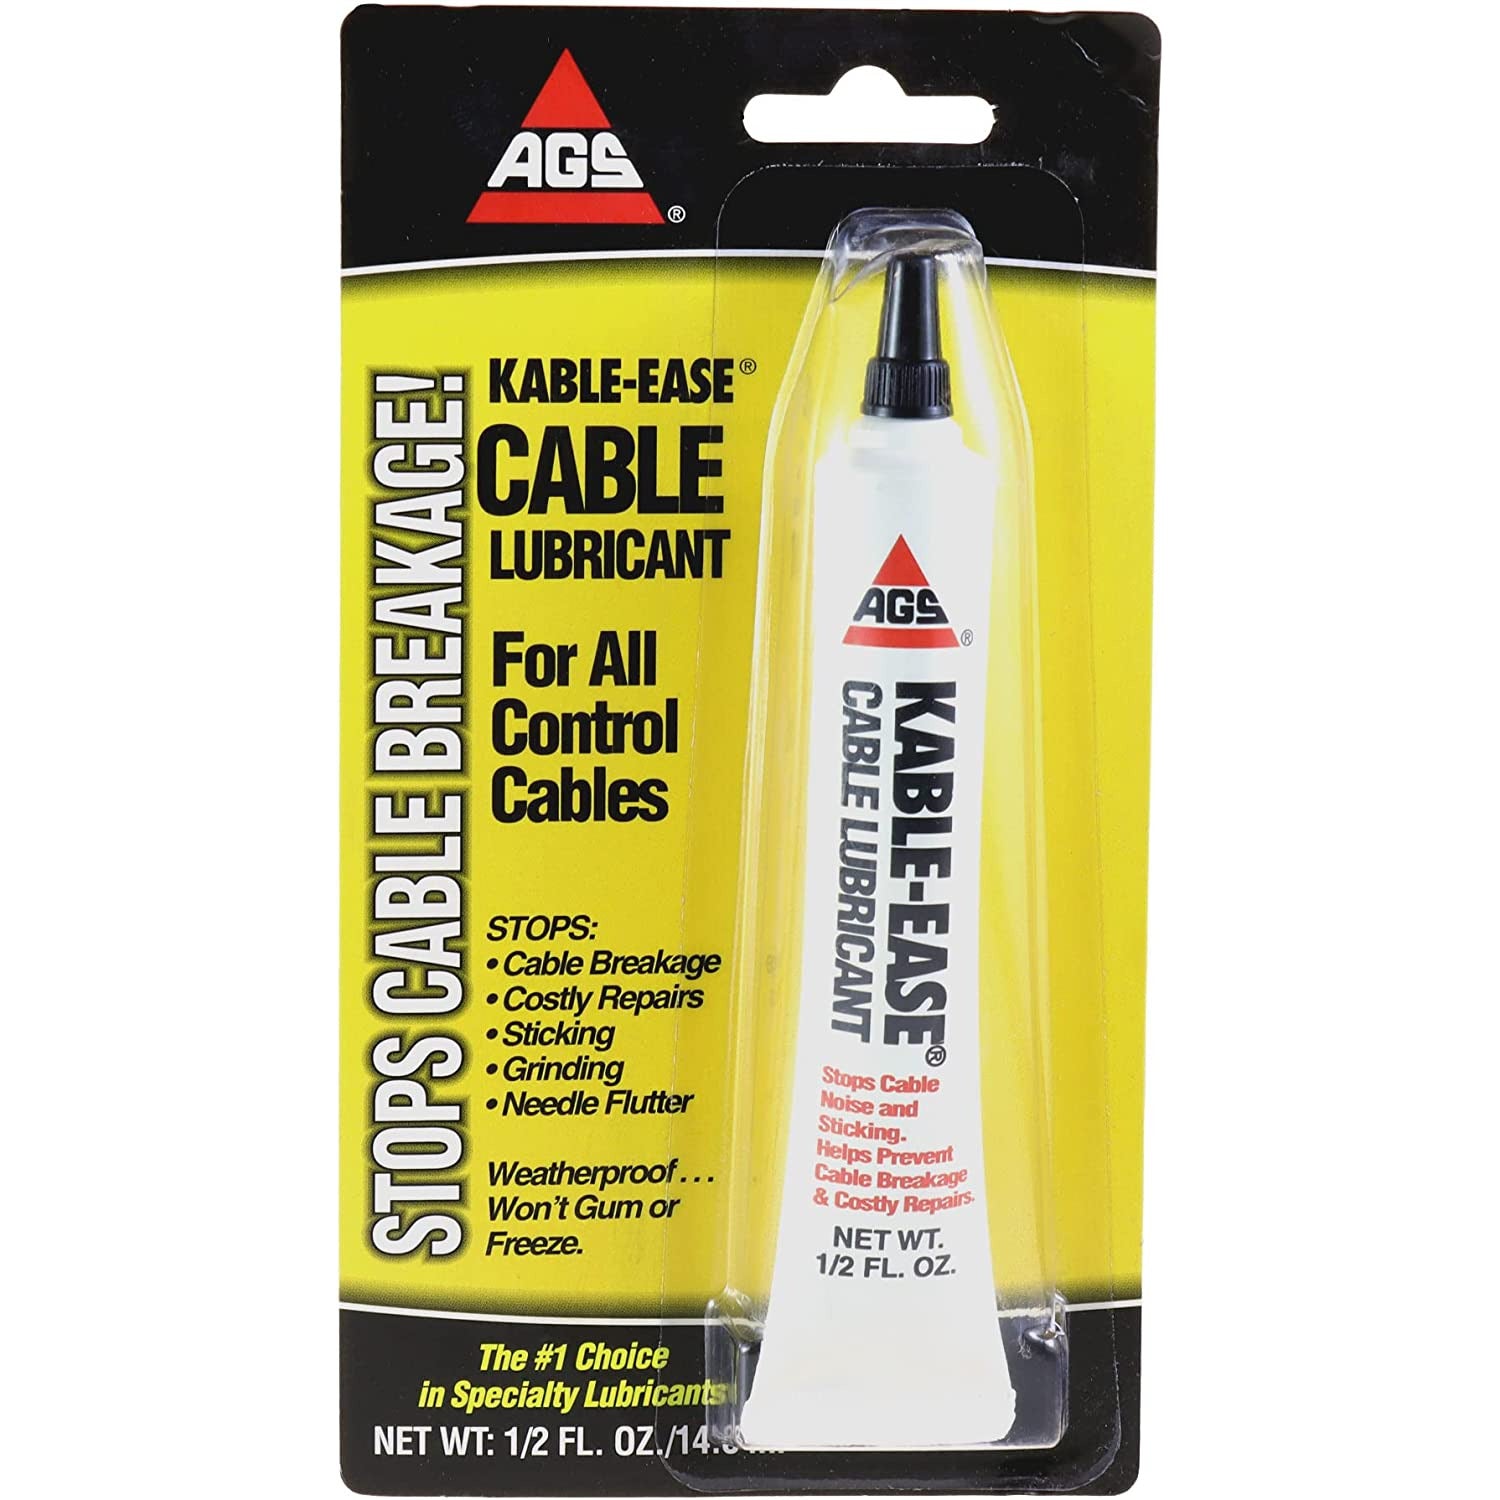 AGS MZ4H AGS KABLE-EASE Cable Lubricant Tube (0.5 oz)